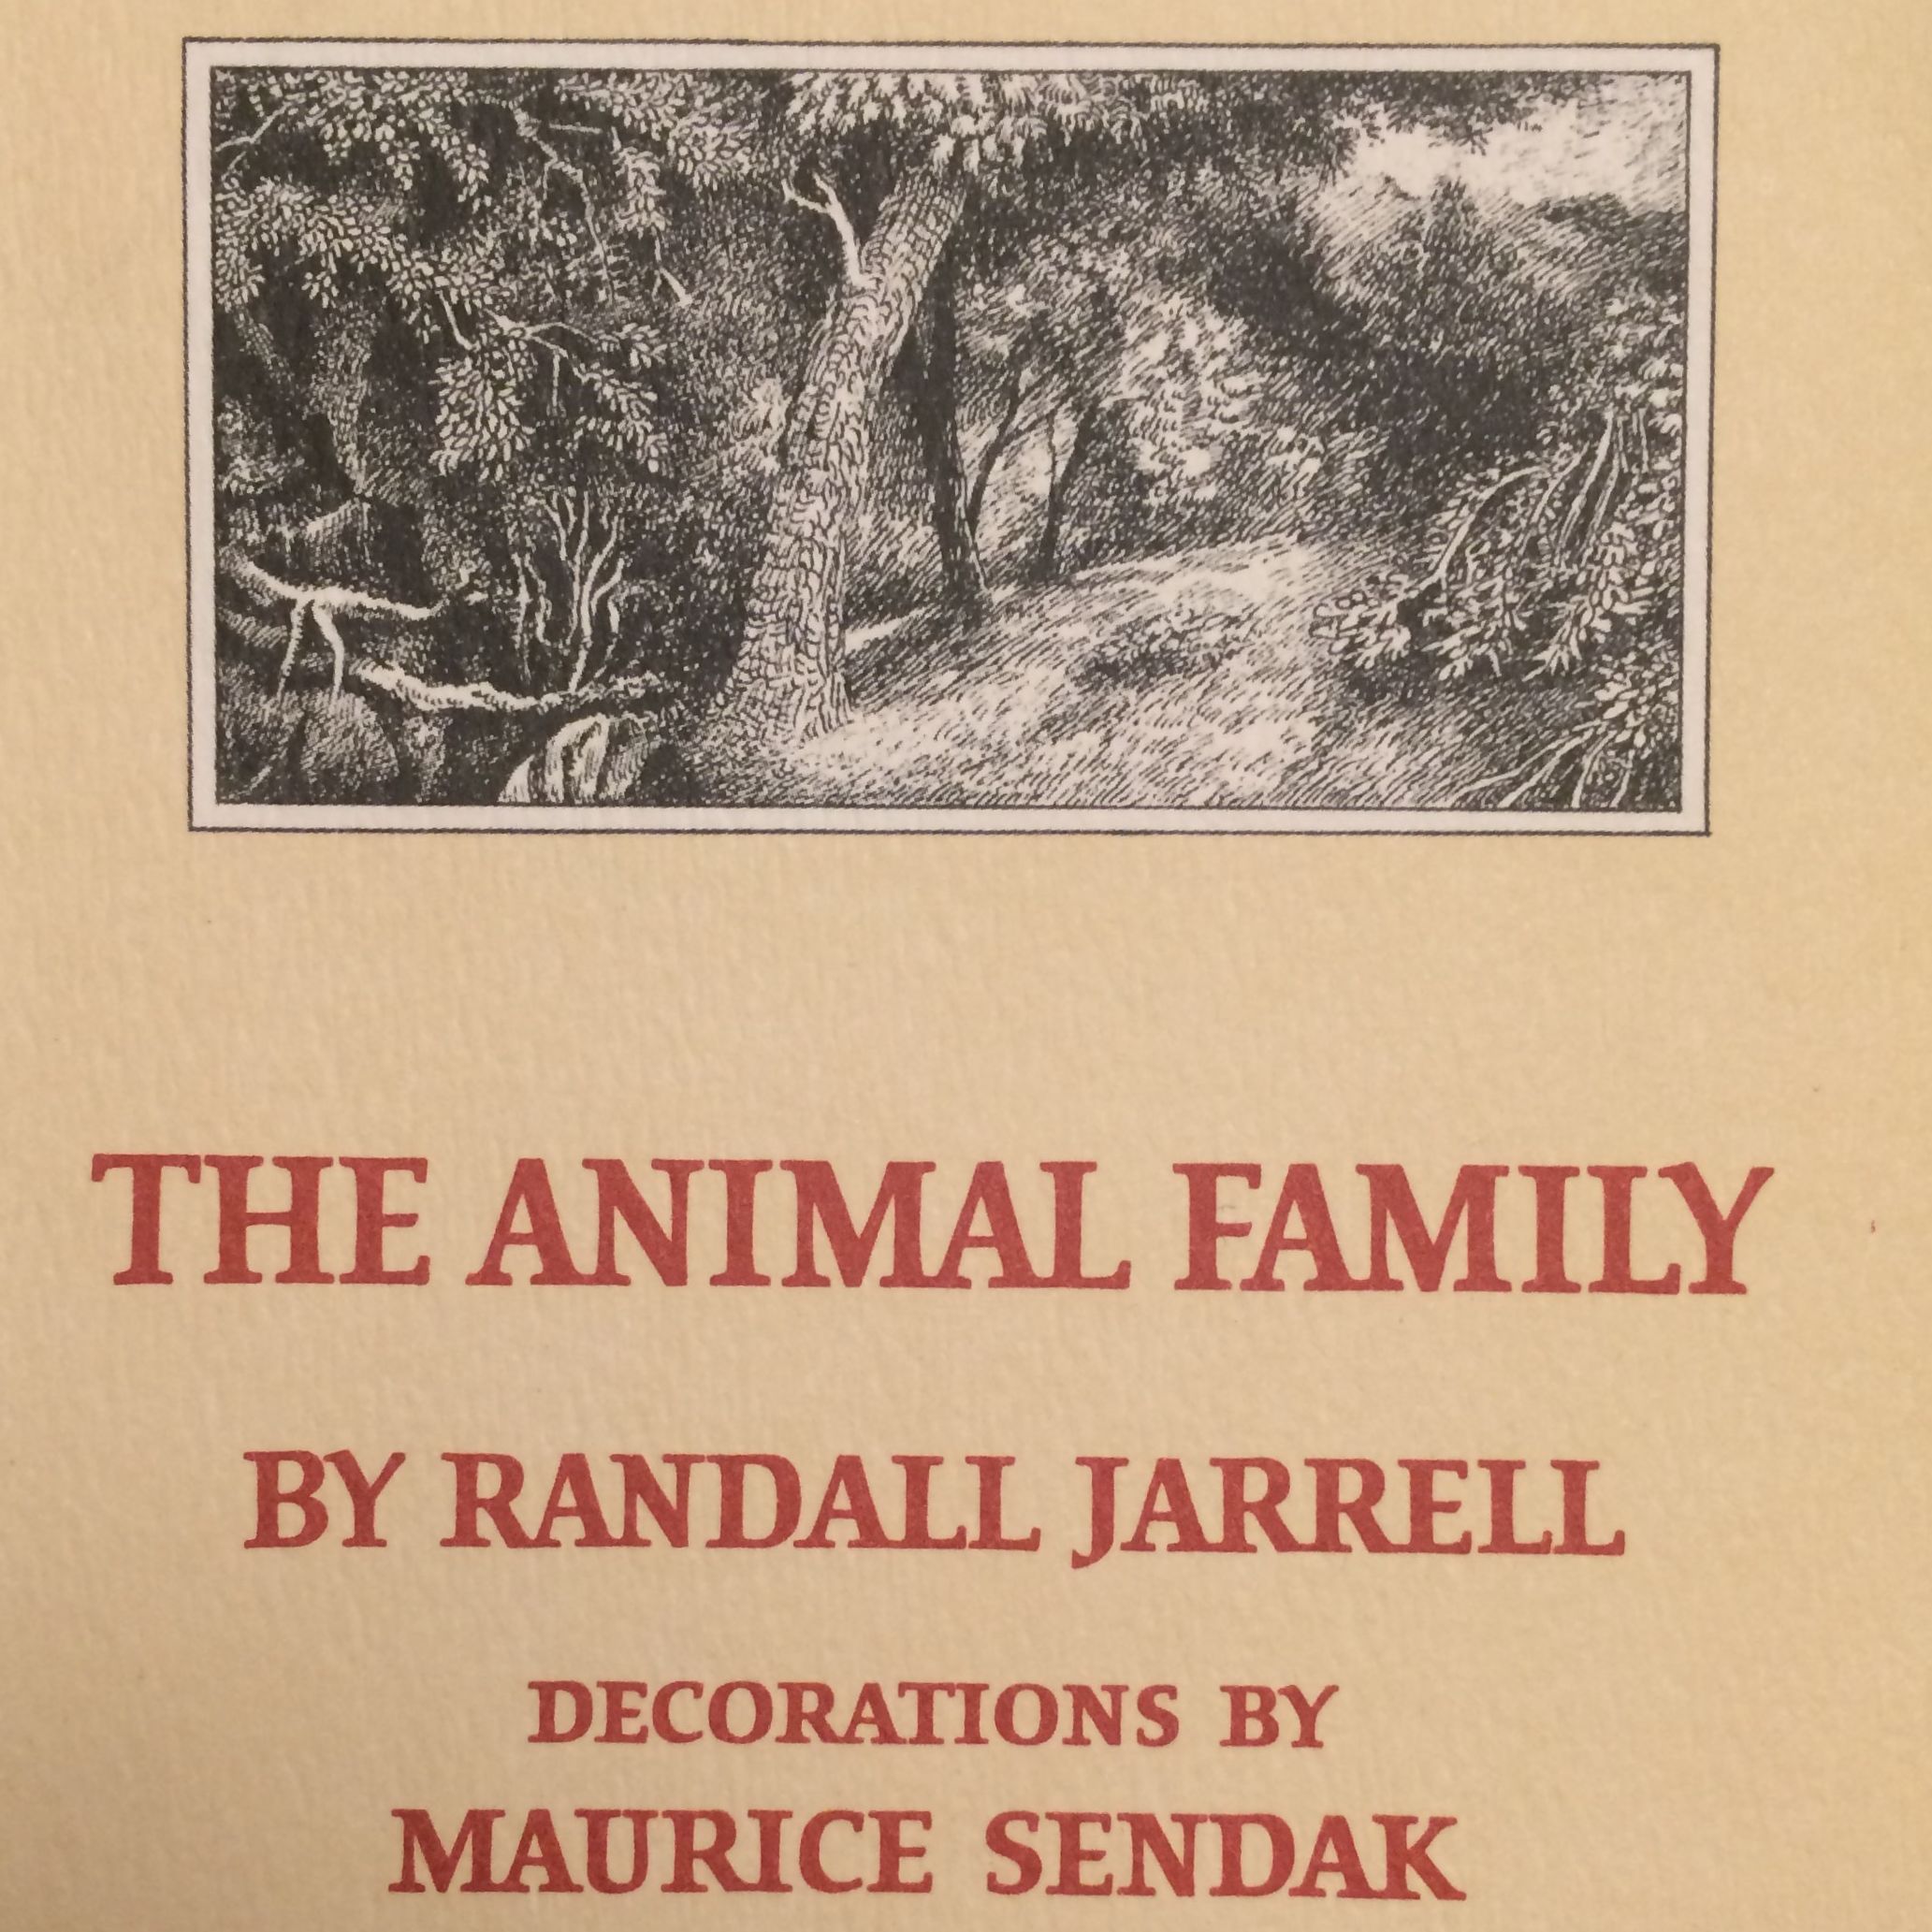 The Animal Family by Randall Jarrell